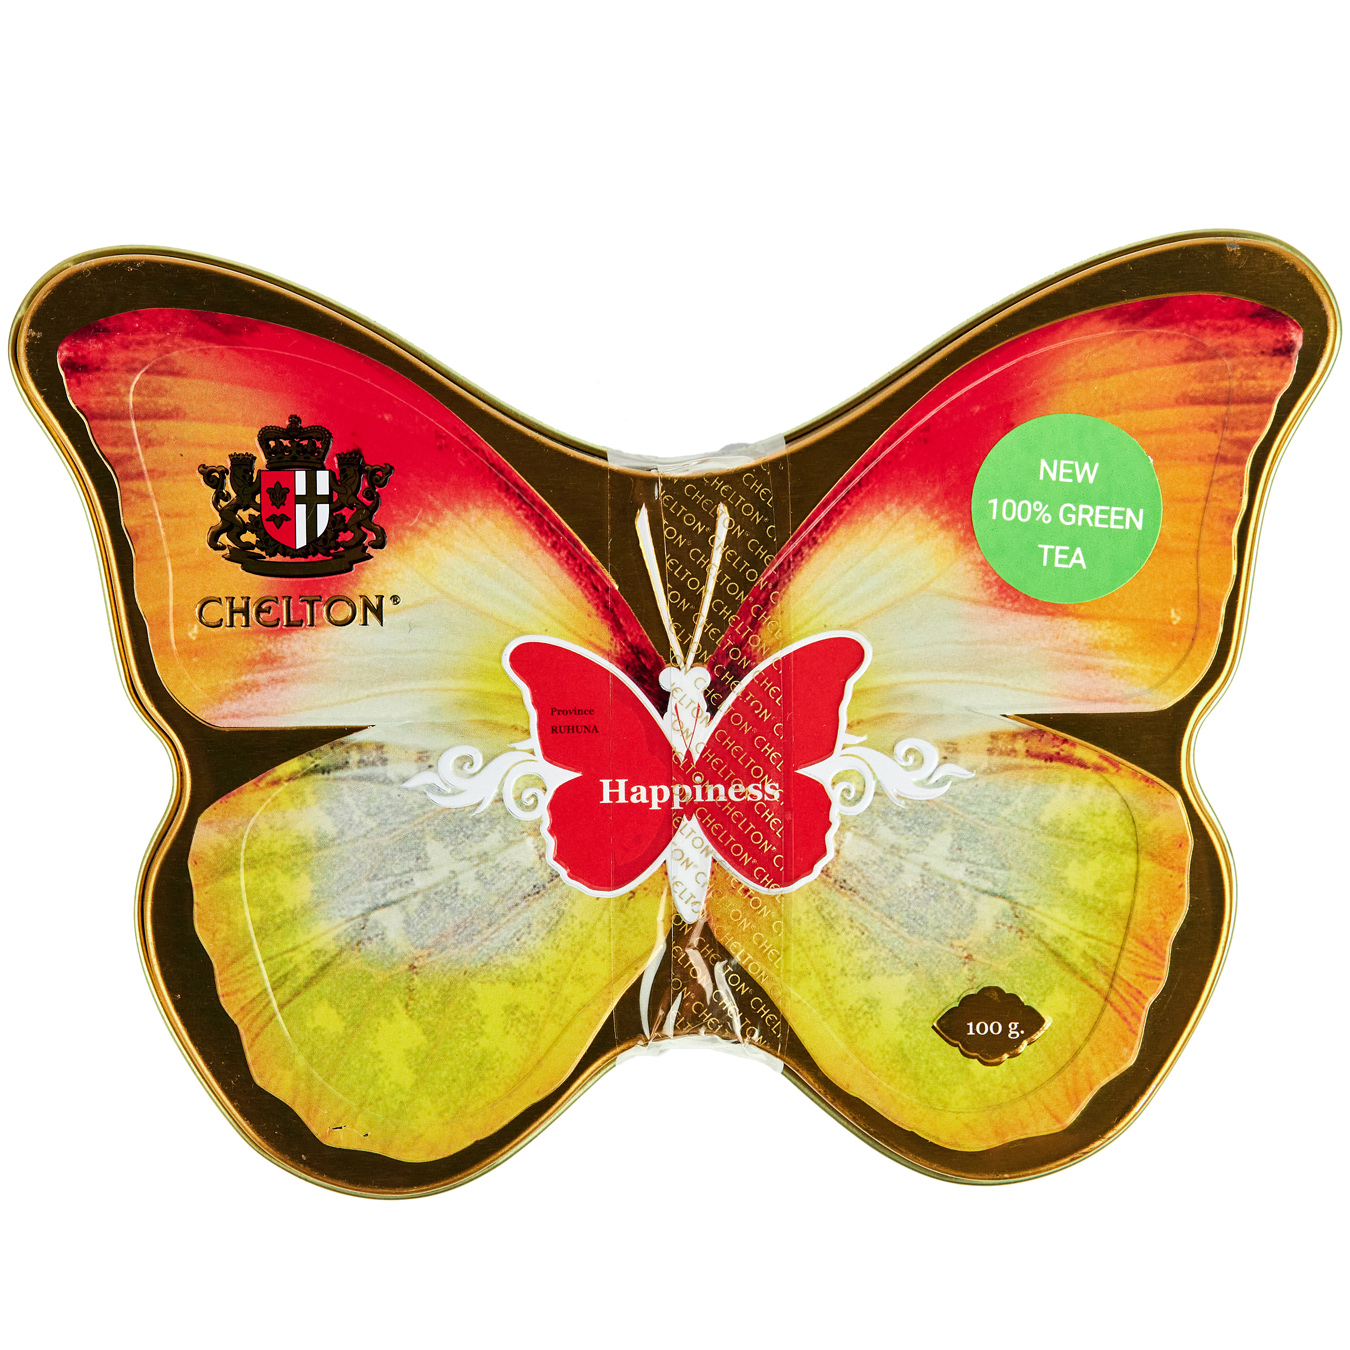 Chelton green tea Butterfly of happiness 100g